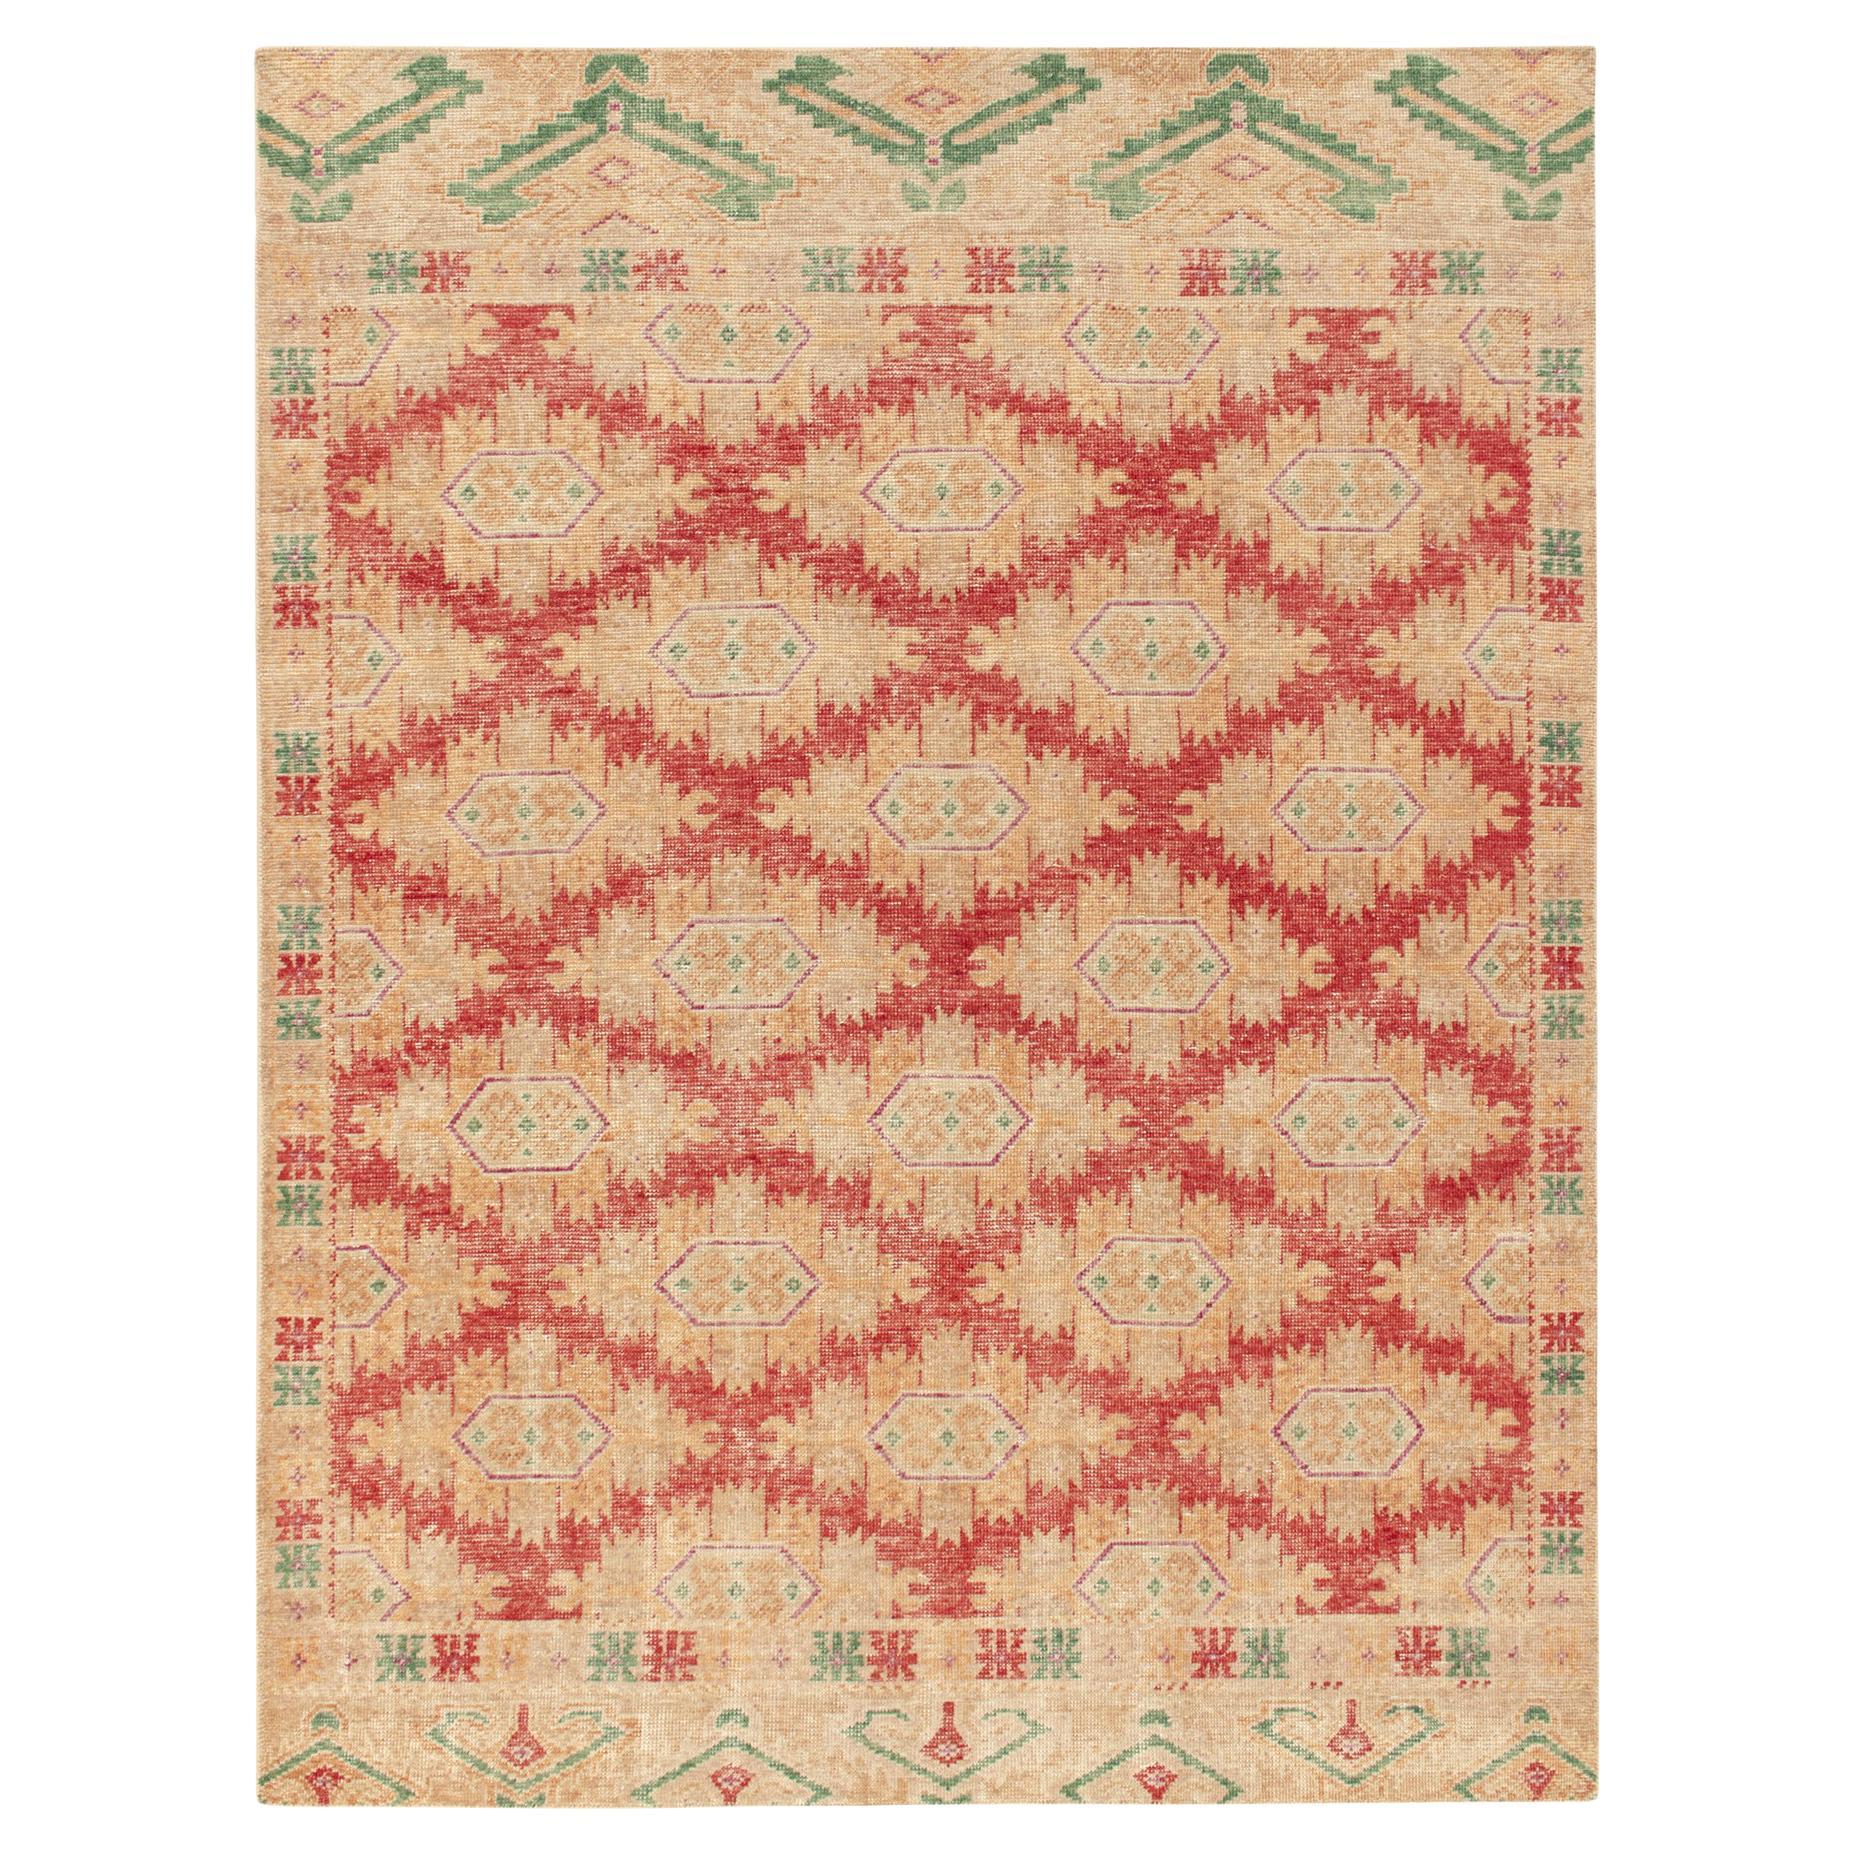 Rug & Kilim's Distressed Style Rug in Red, Gold, Green Geometric Pattern For Sale